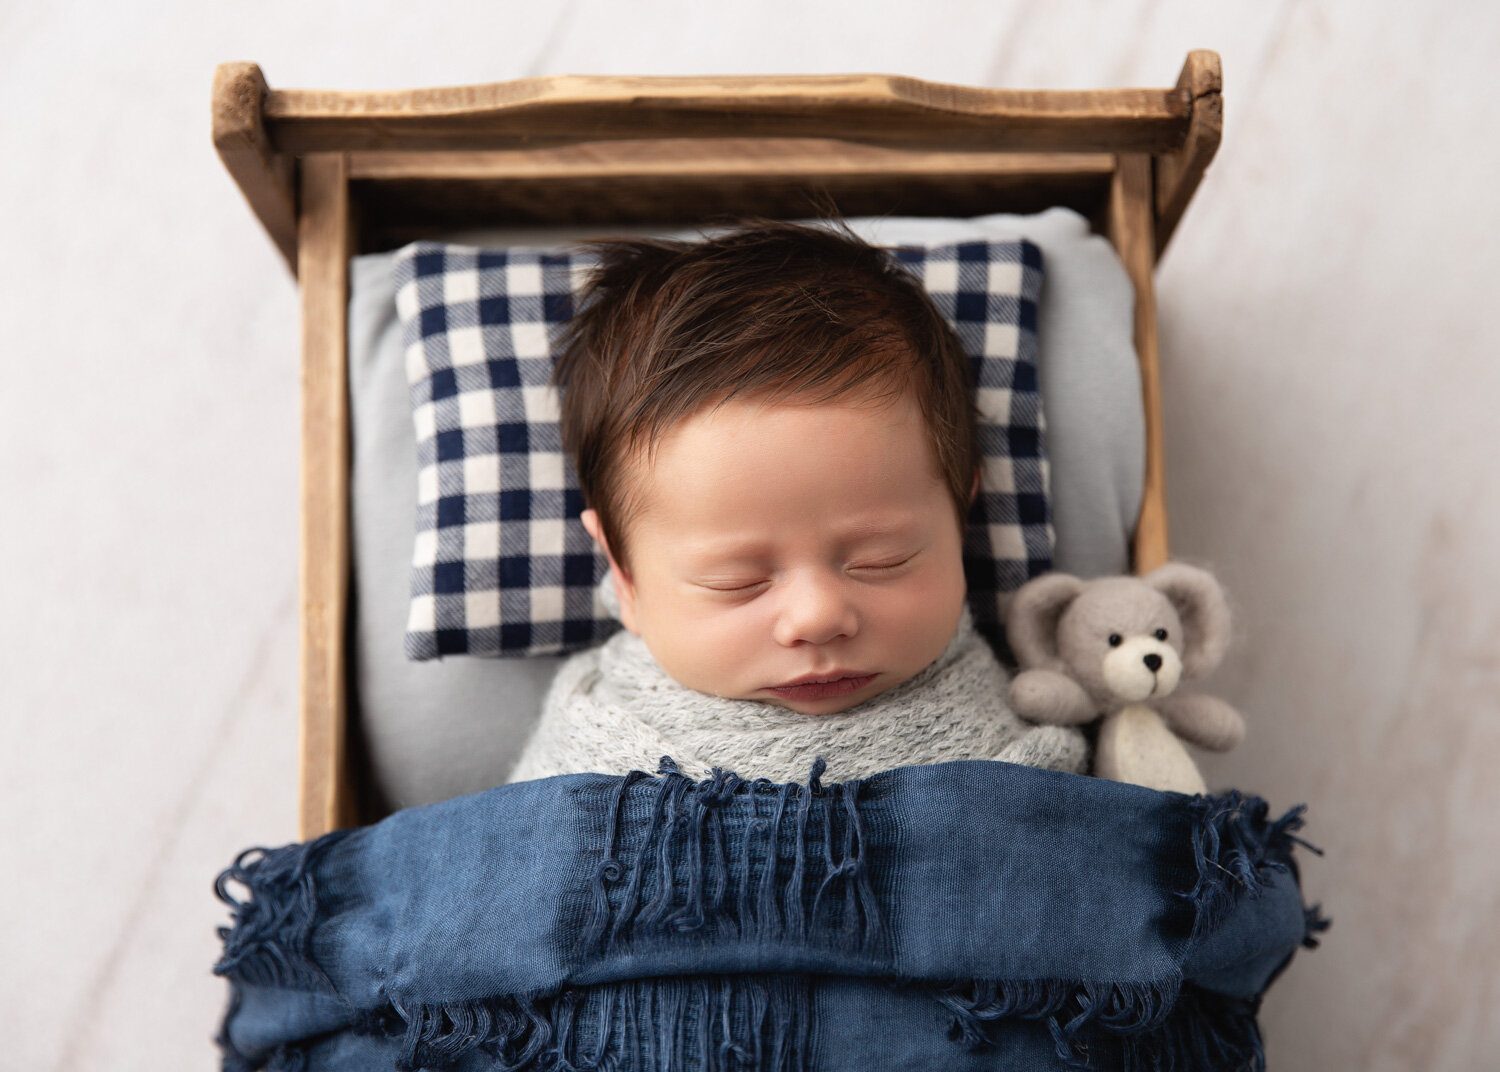  Baby boy with lucious dark hair in bed prop during newborn photography shoot in Winnipeg with Sue Skrabek 